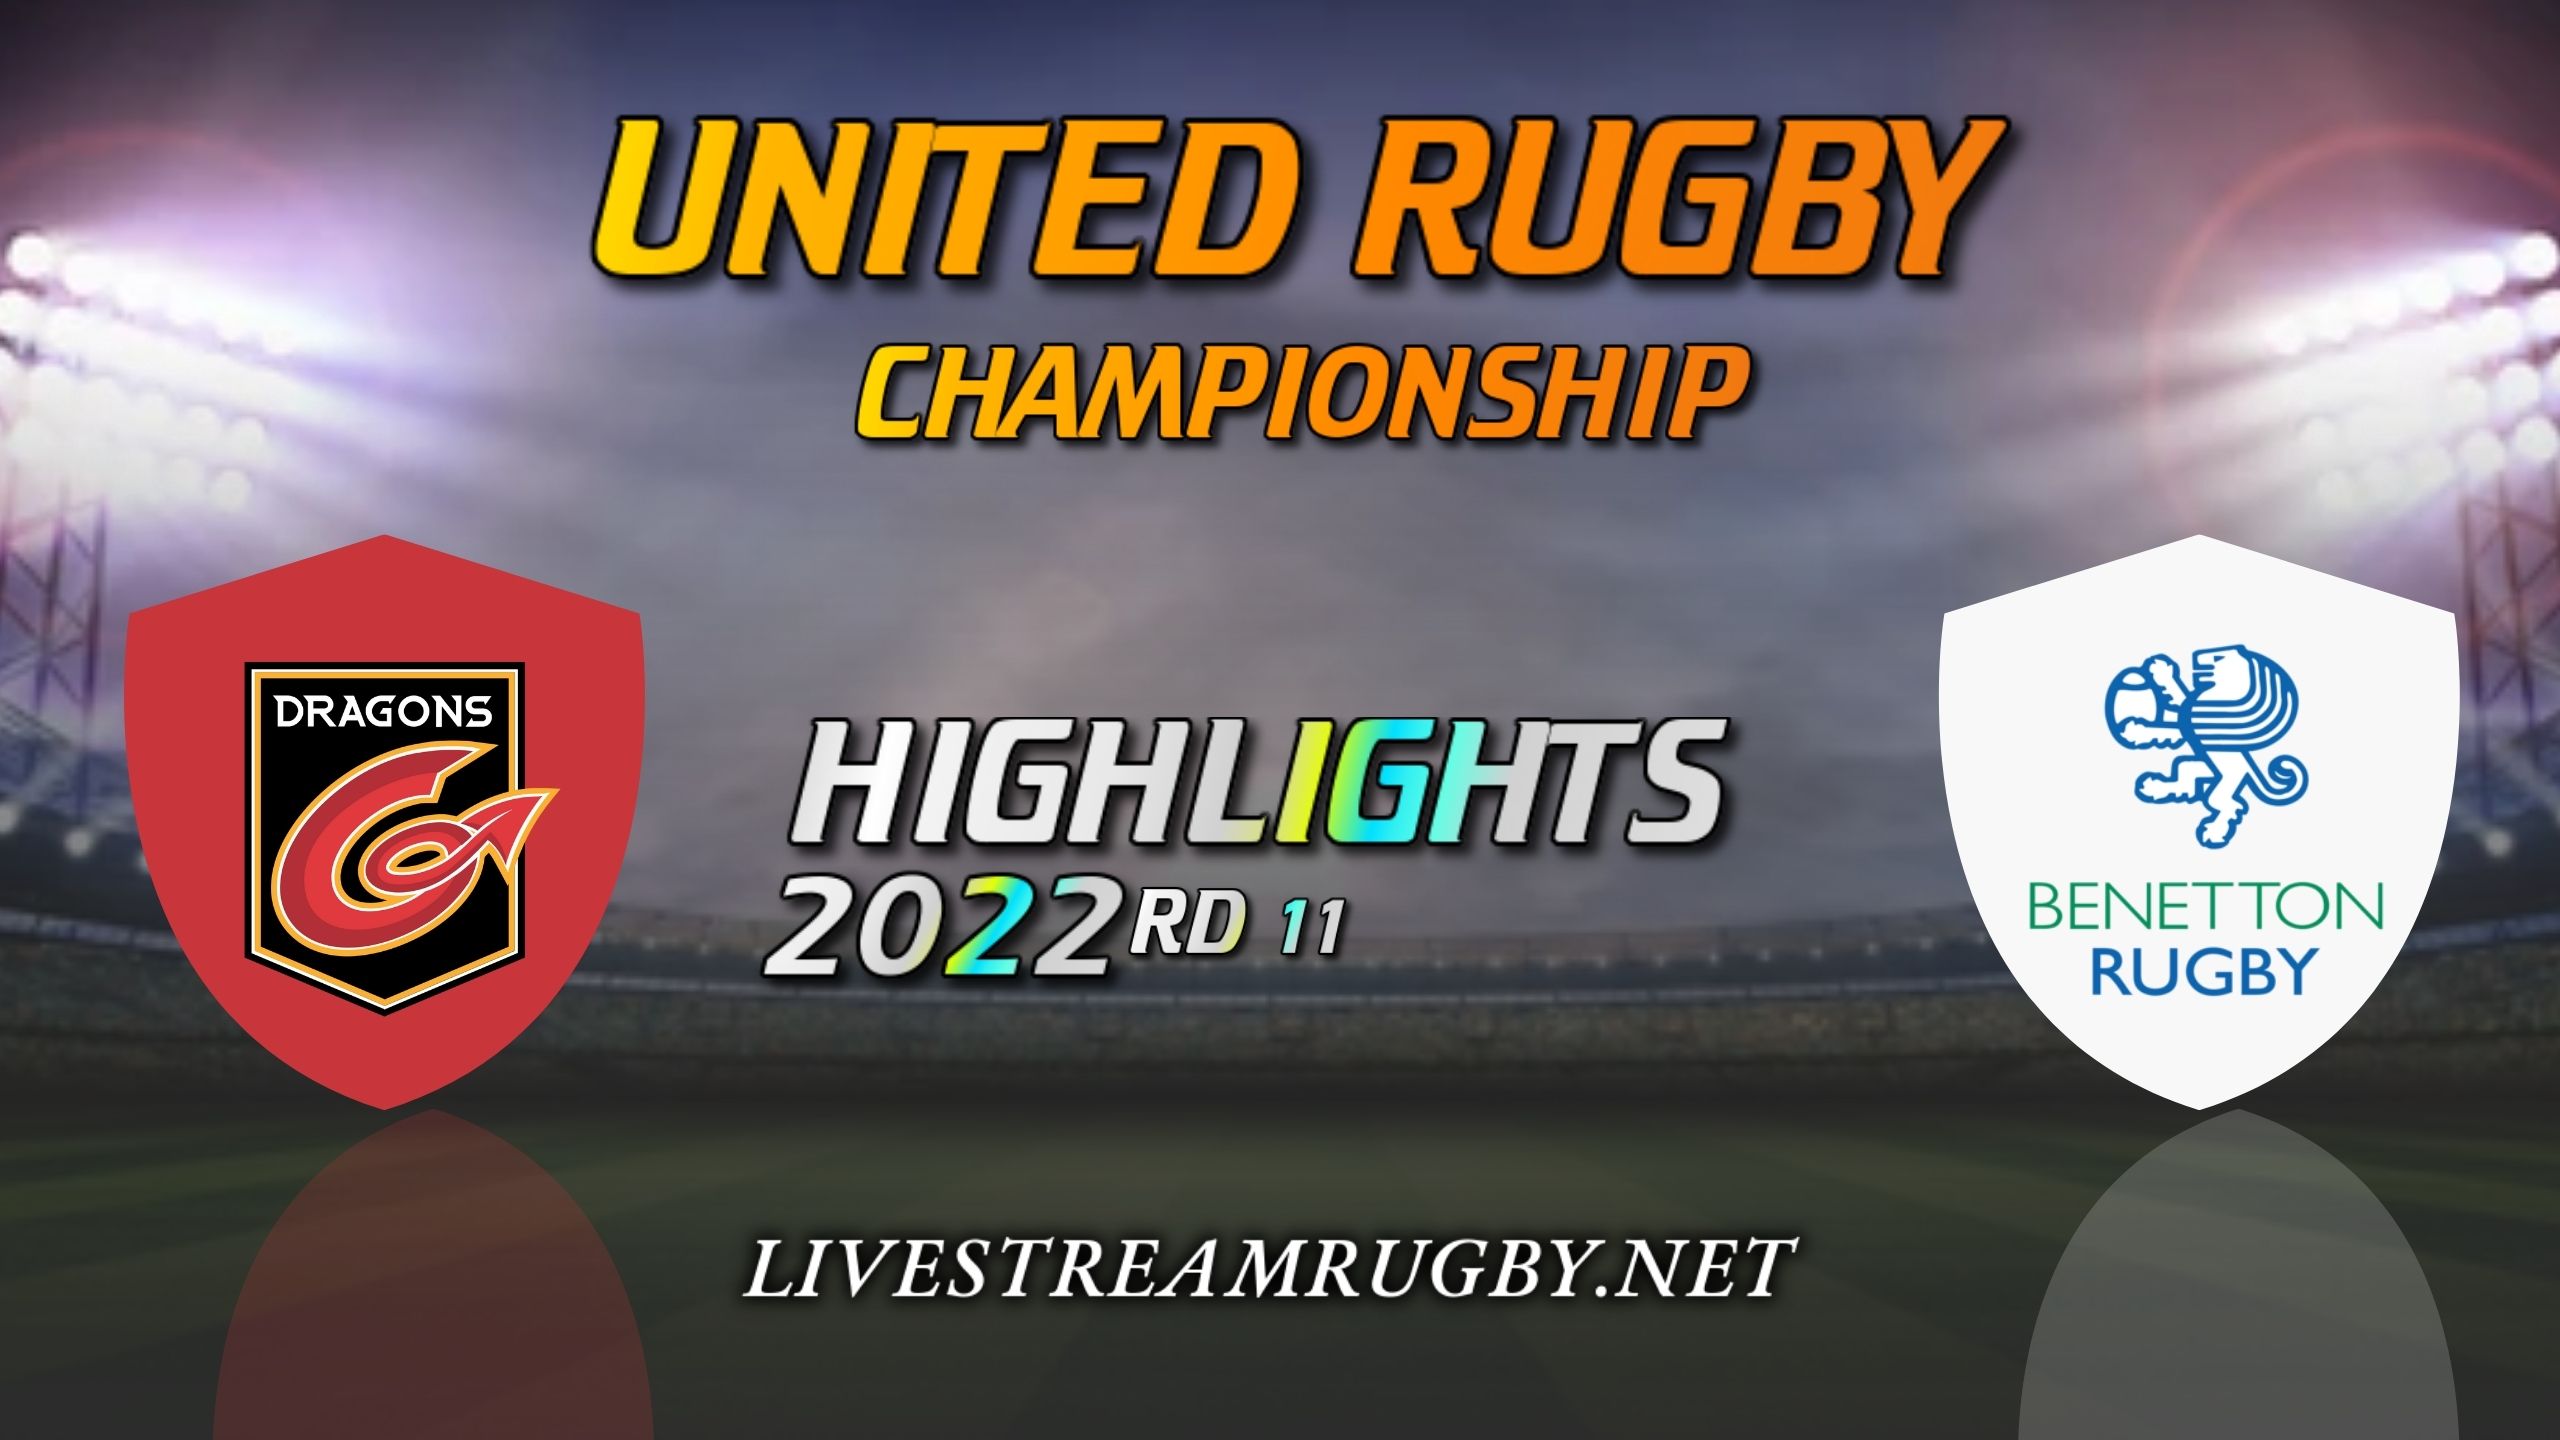 Dragons Vs Benetton Highlights 2022 Rd 11 United Rugby